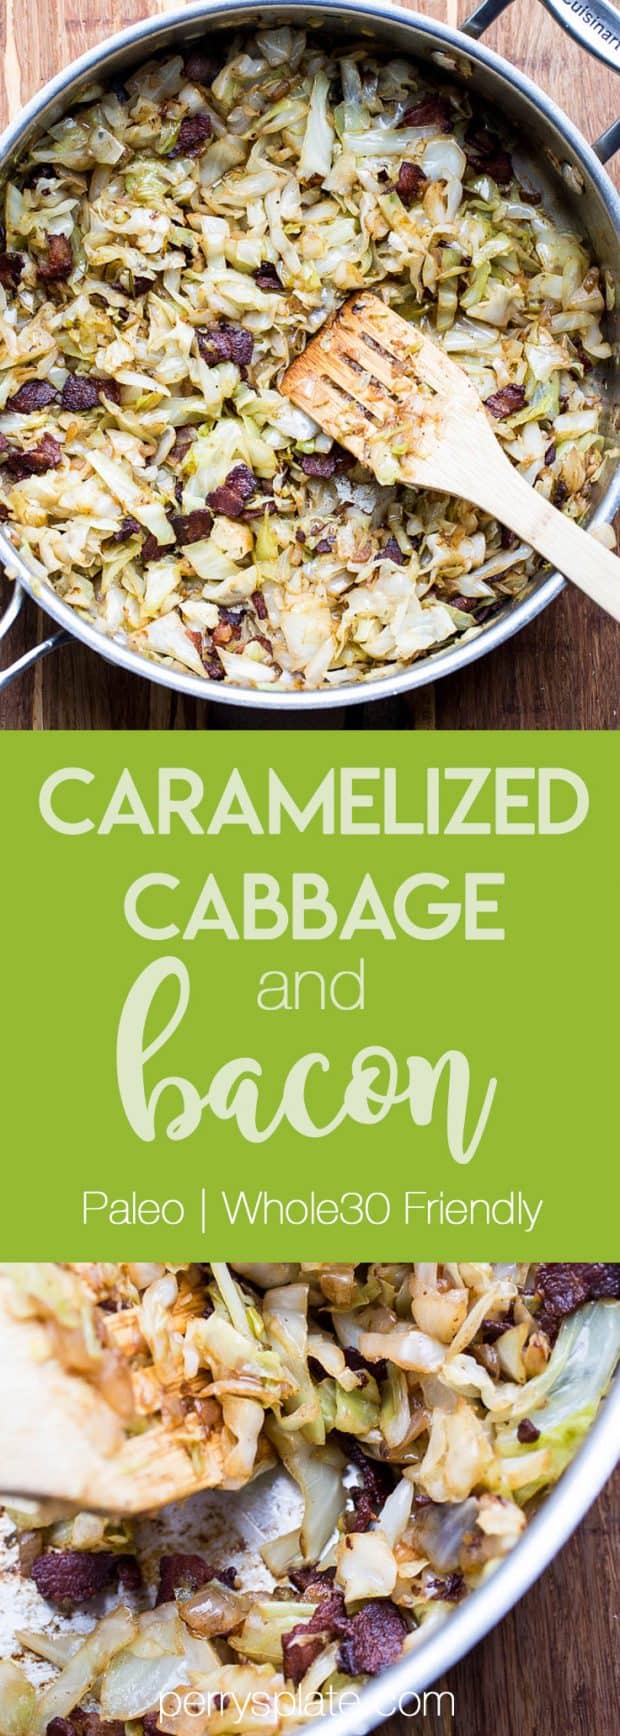 Caramelized Cabbage and Bacon - Perry's Plate